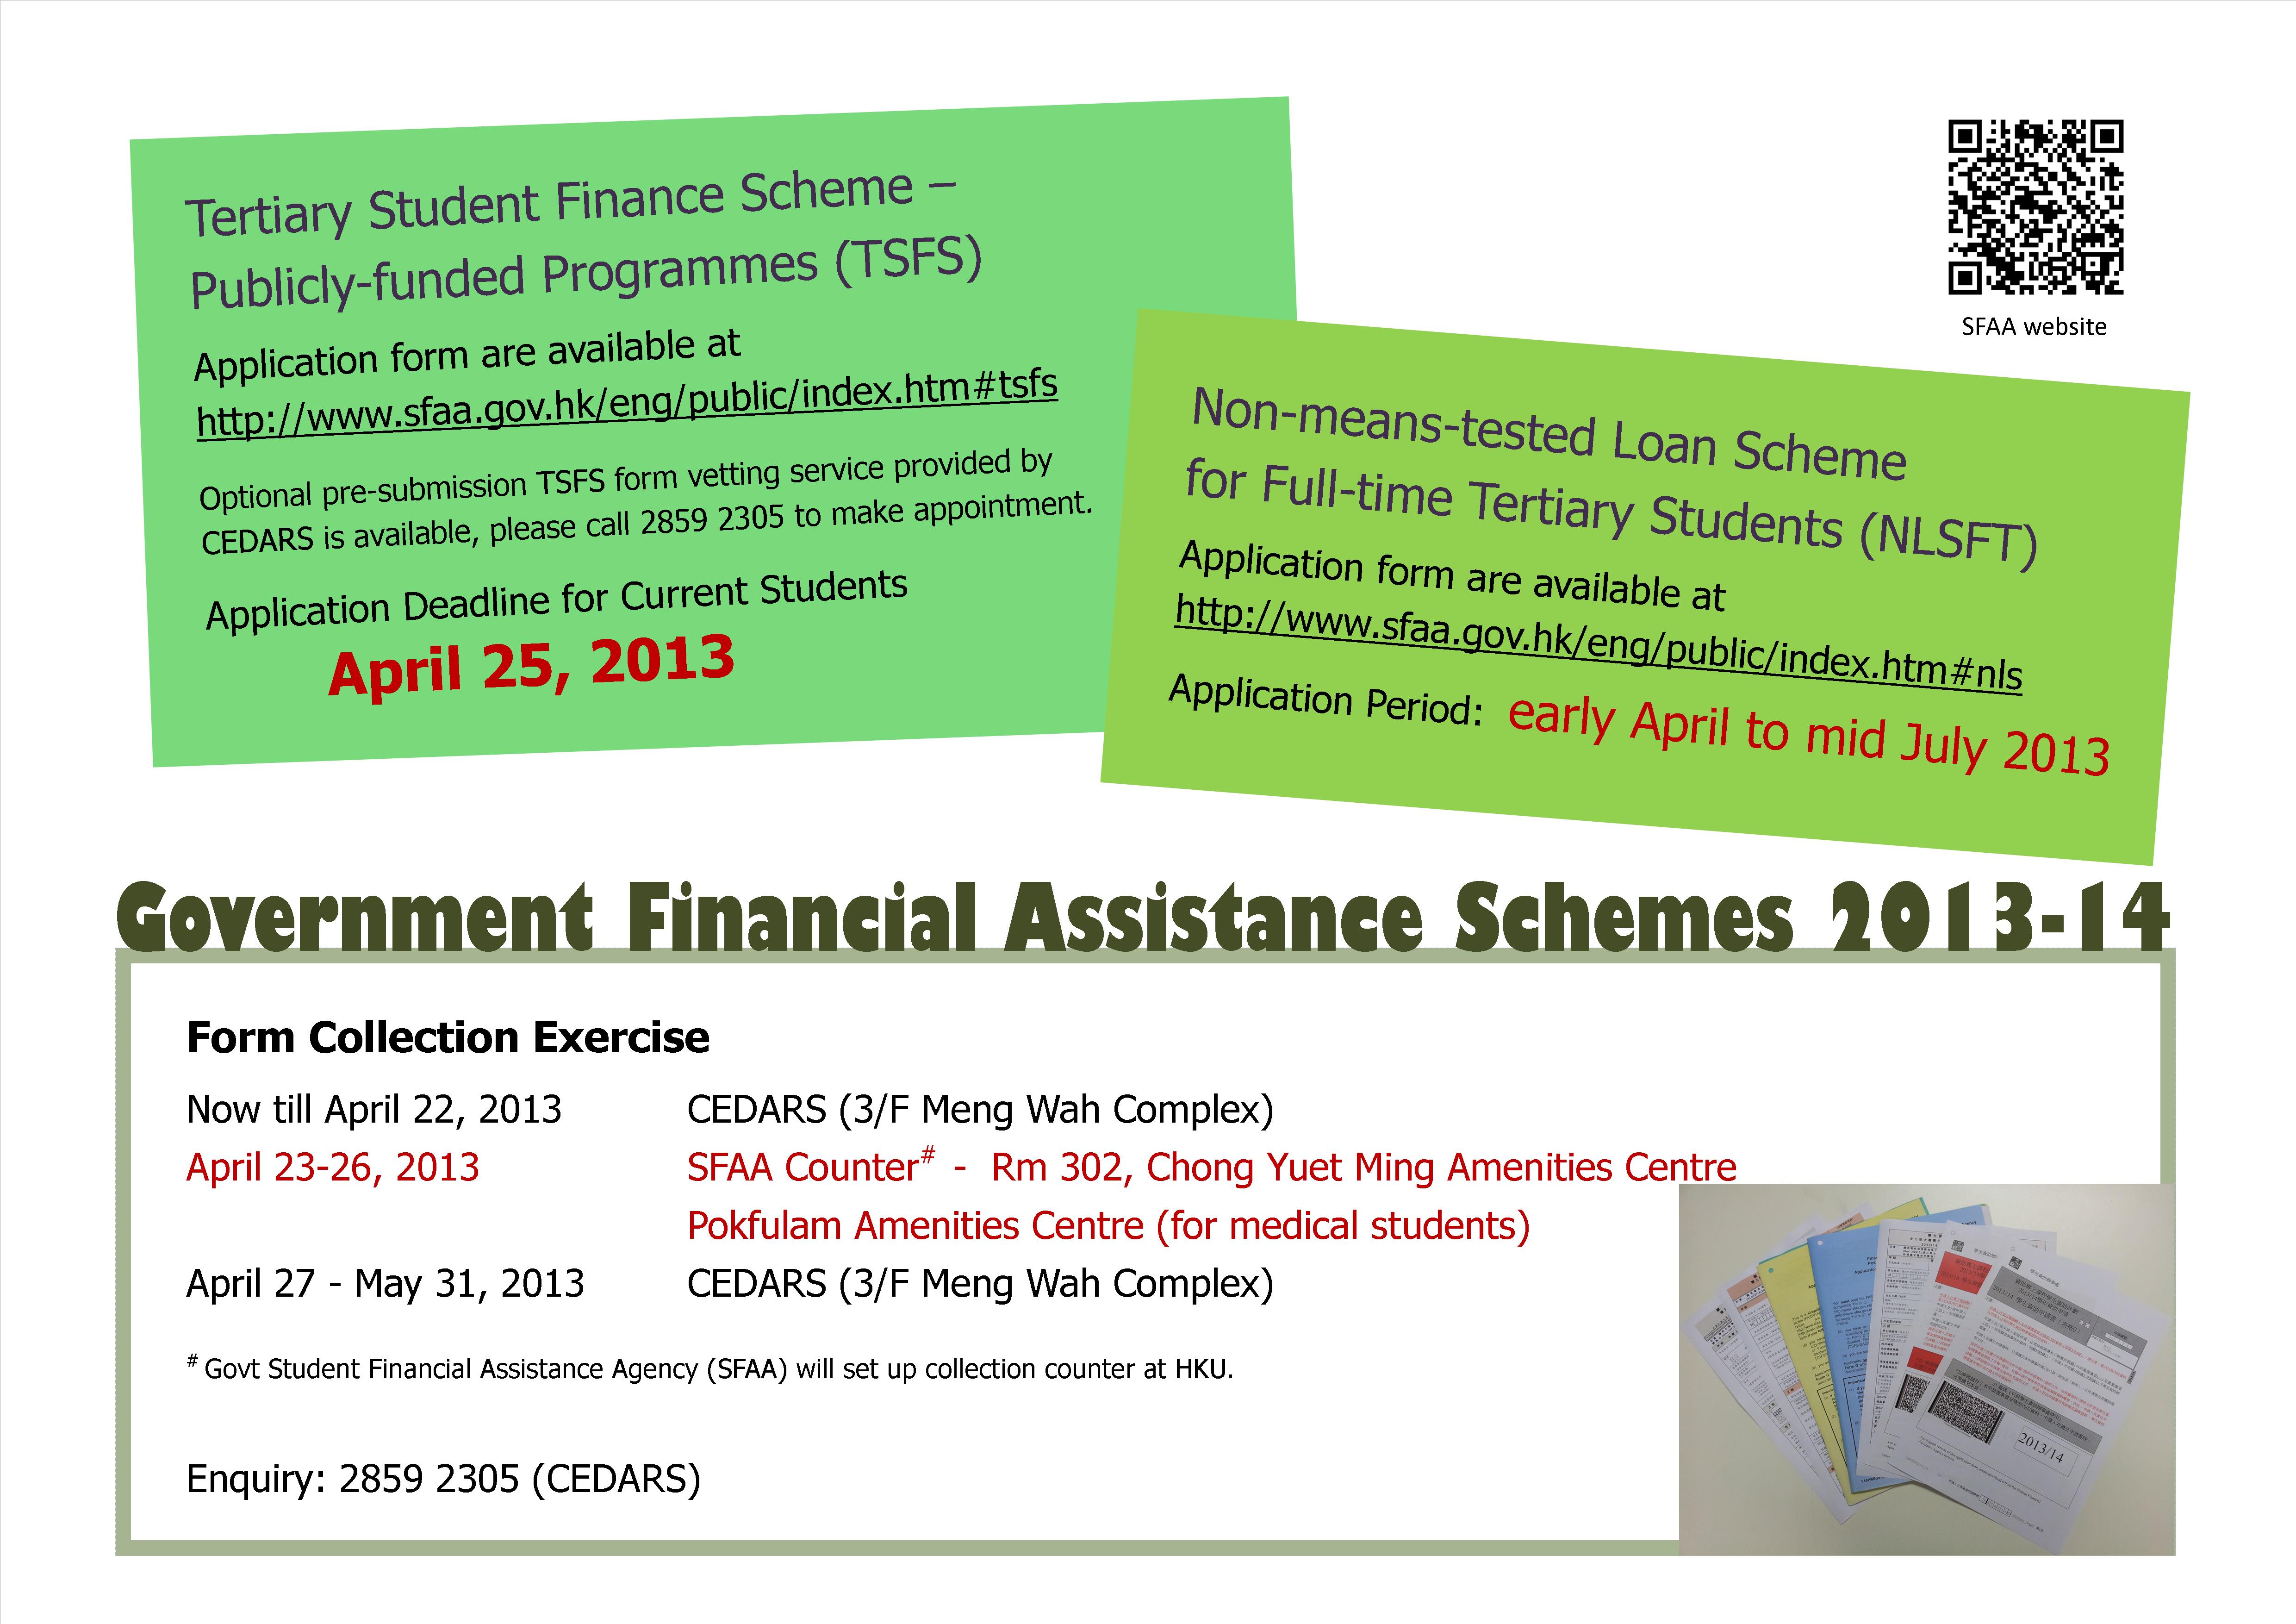 Government Financial Assistance Schemes (TSFS & NLSFT) 2013/14 for Current Students